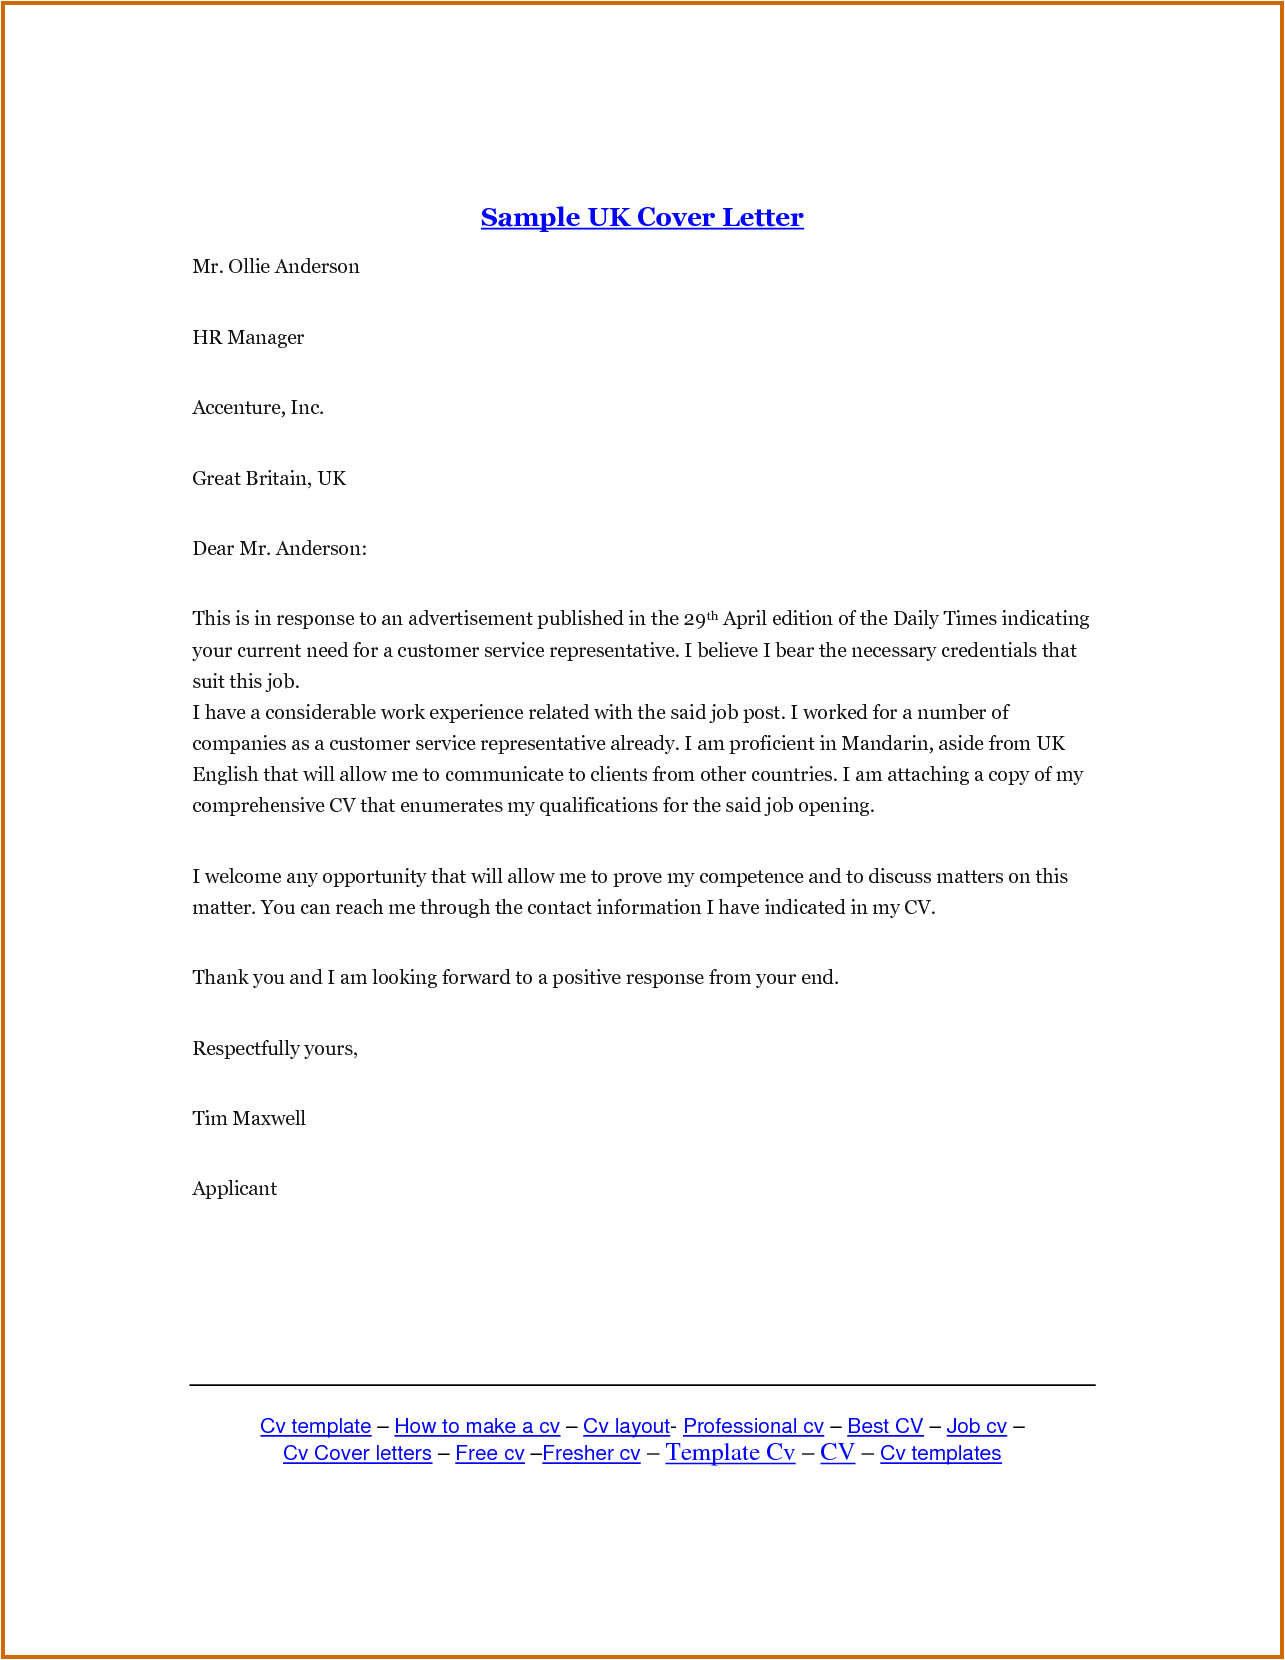 10 how to write a cover letter uk